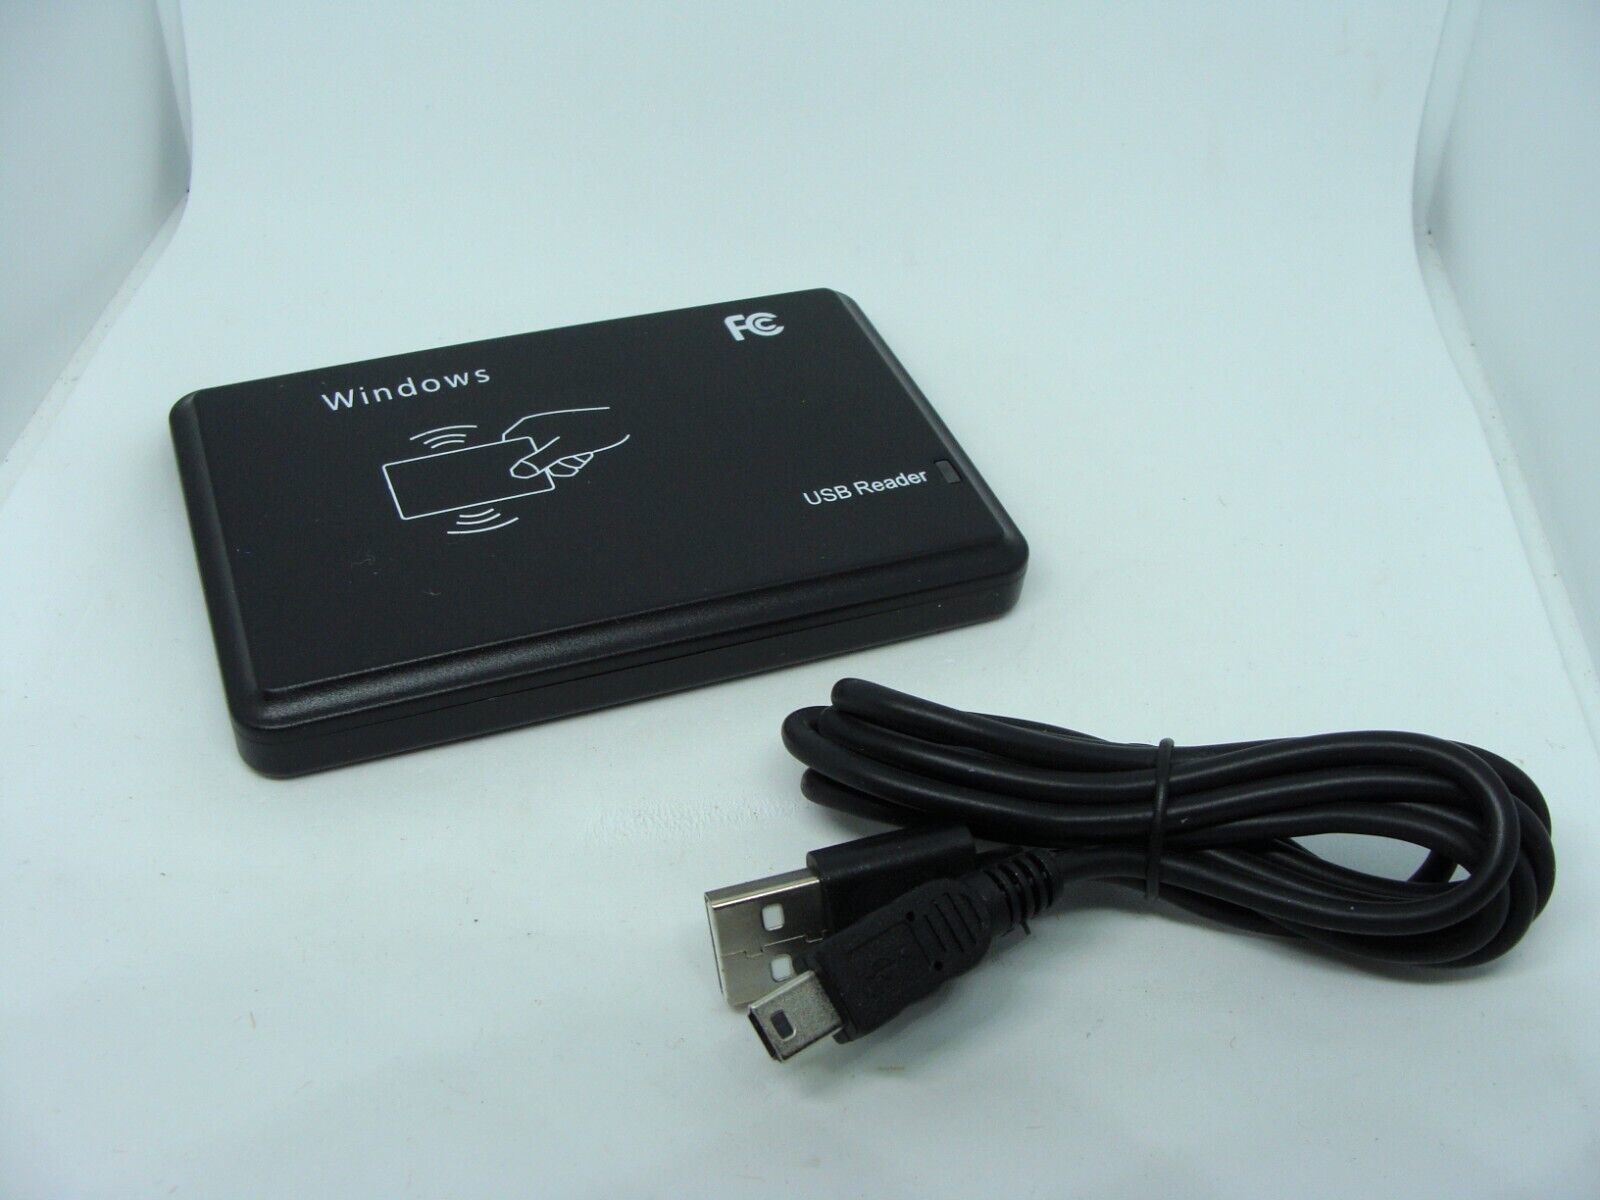 Primary image for RFID 125Khz USB Smart Card Reader Touchless Contactless Proximity Sensor EM4100